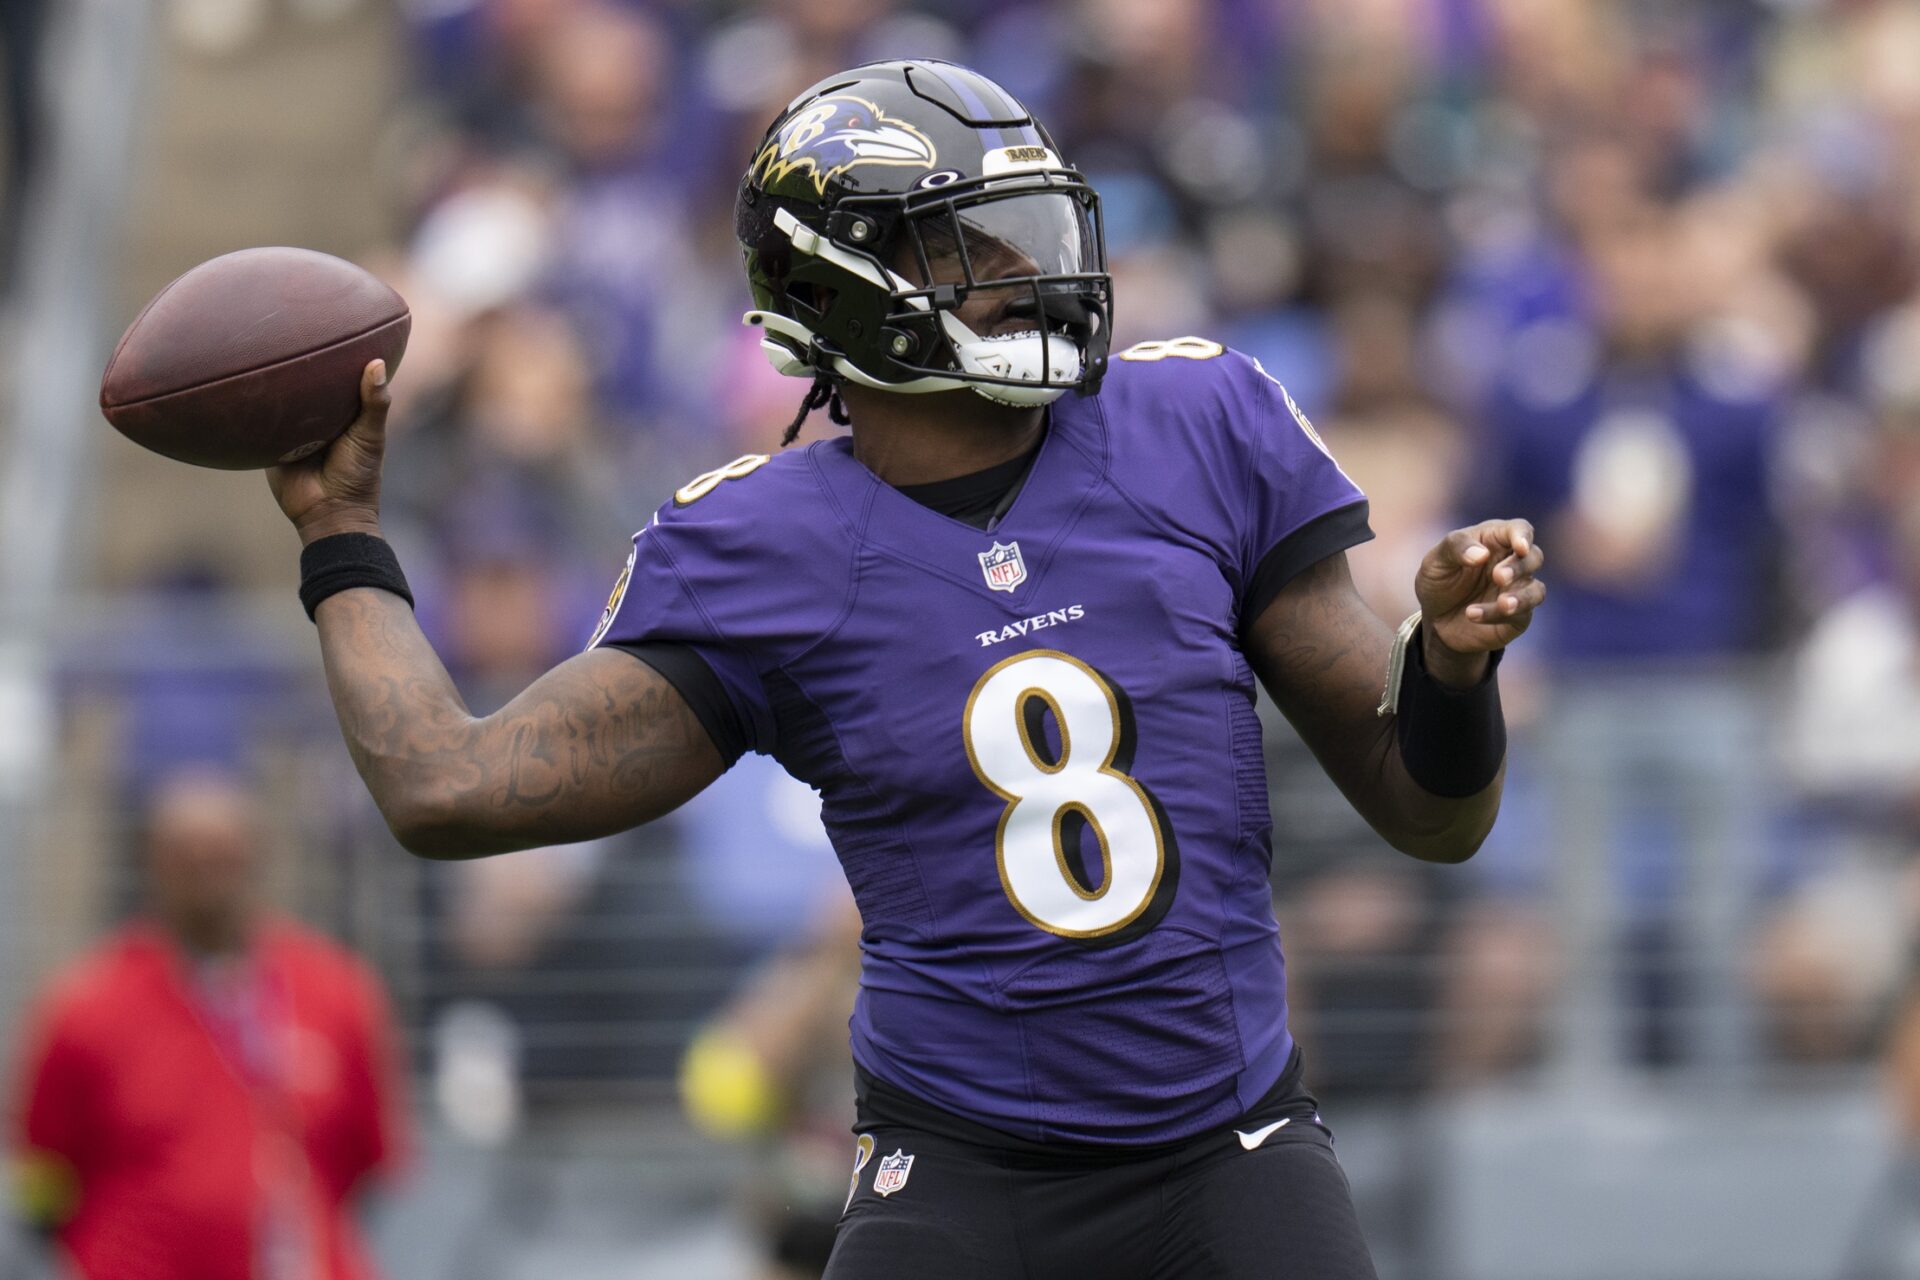 Lamar Jackson (8) throws the ball against the Cleveland Browns during the first half at M&T Bank Stadium.